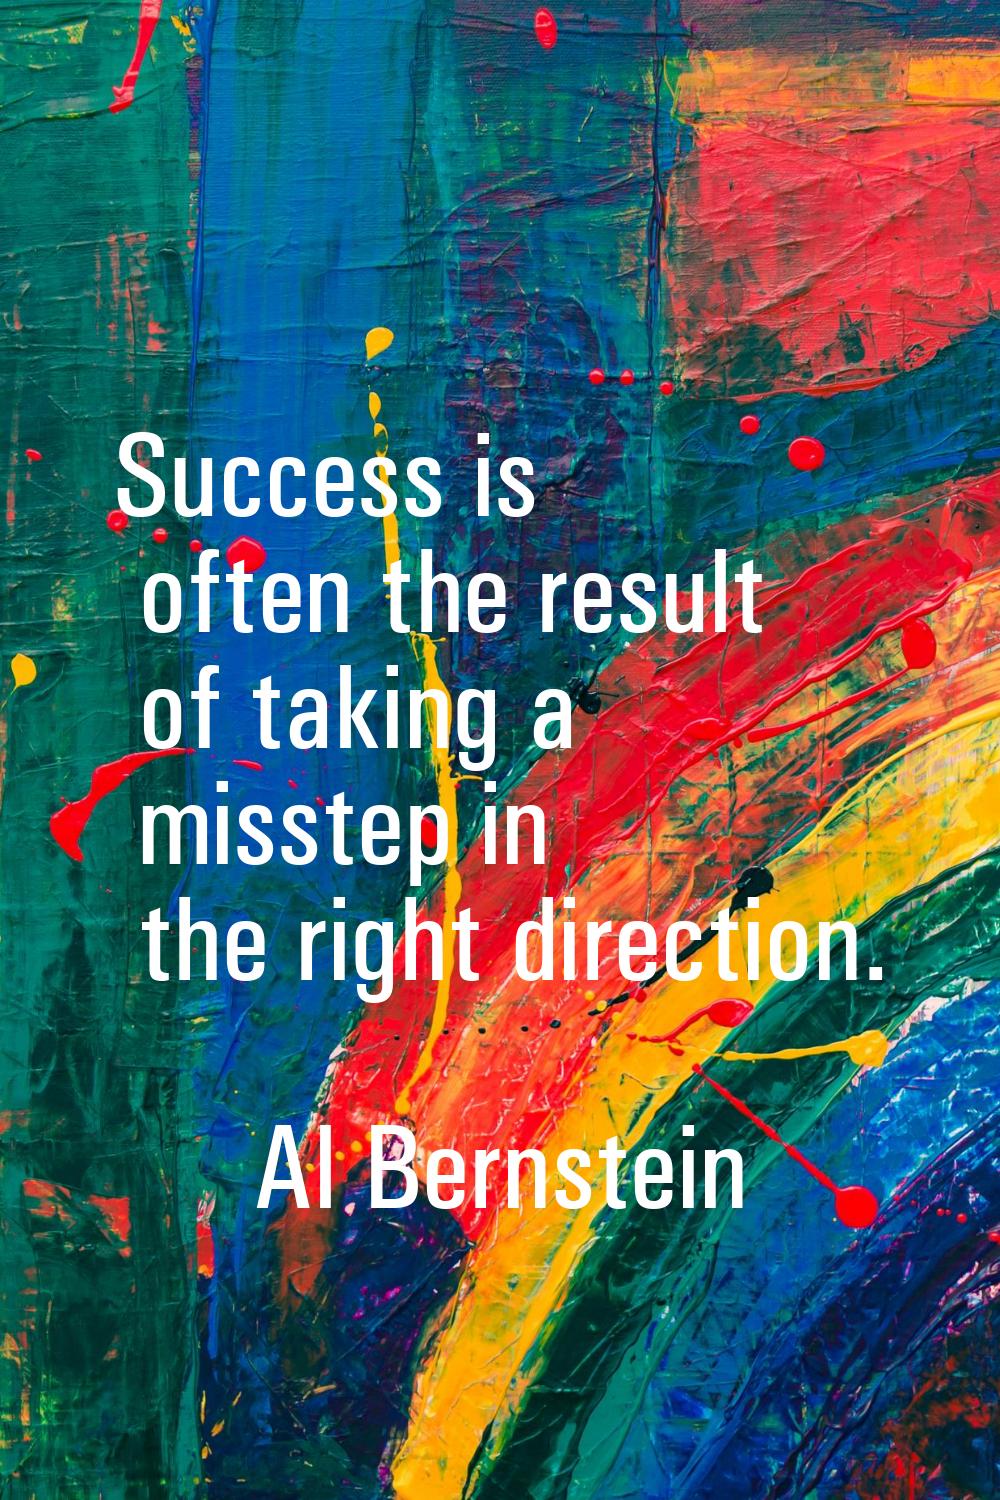 Success is often the result of taking a misstep in the right direction.